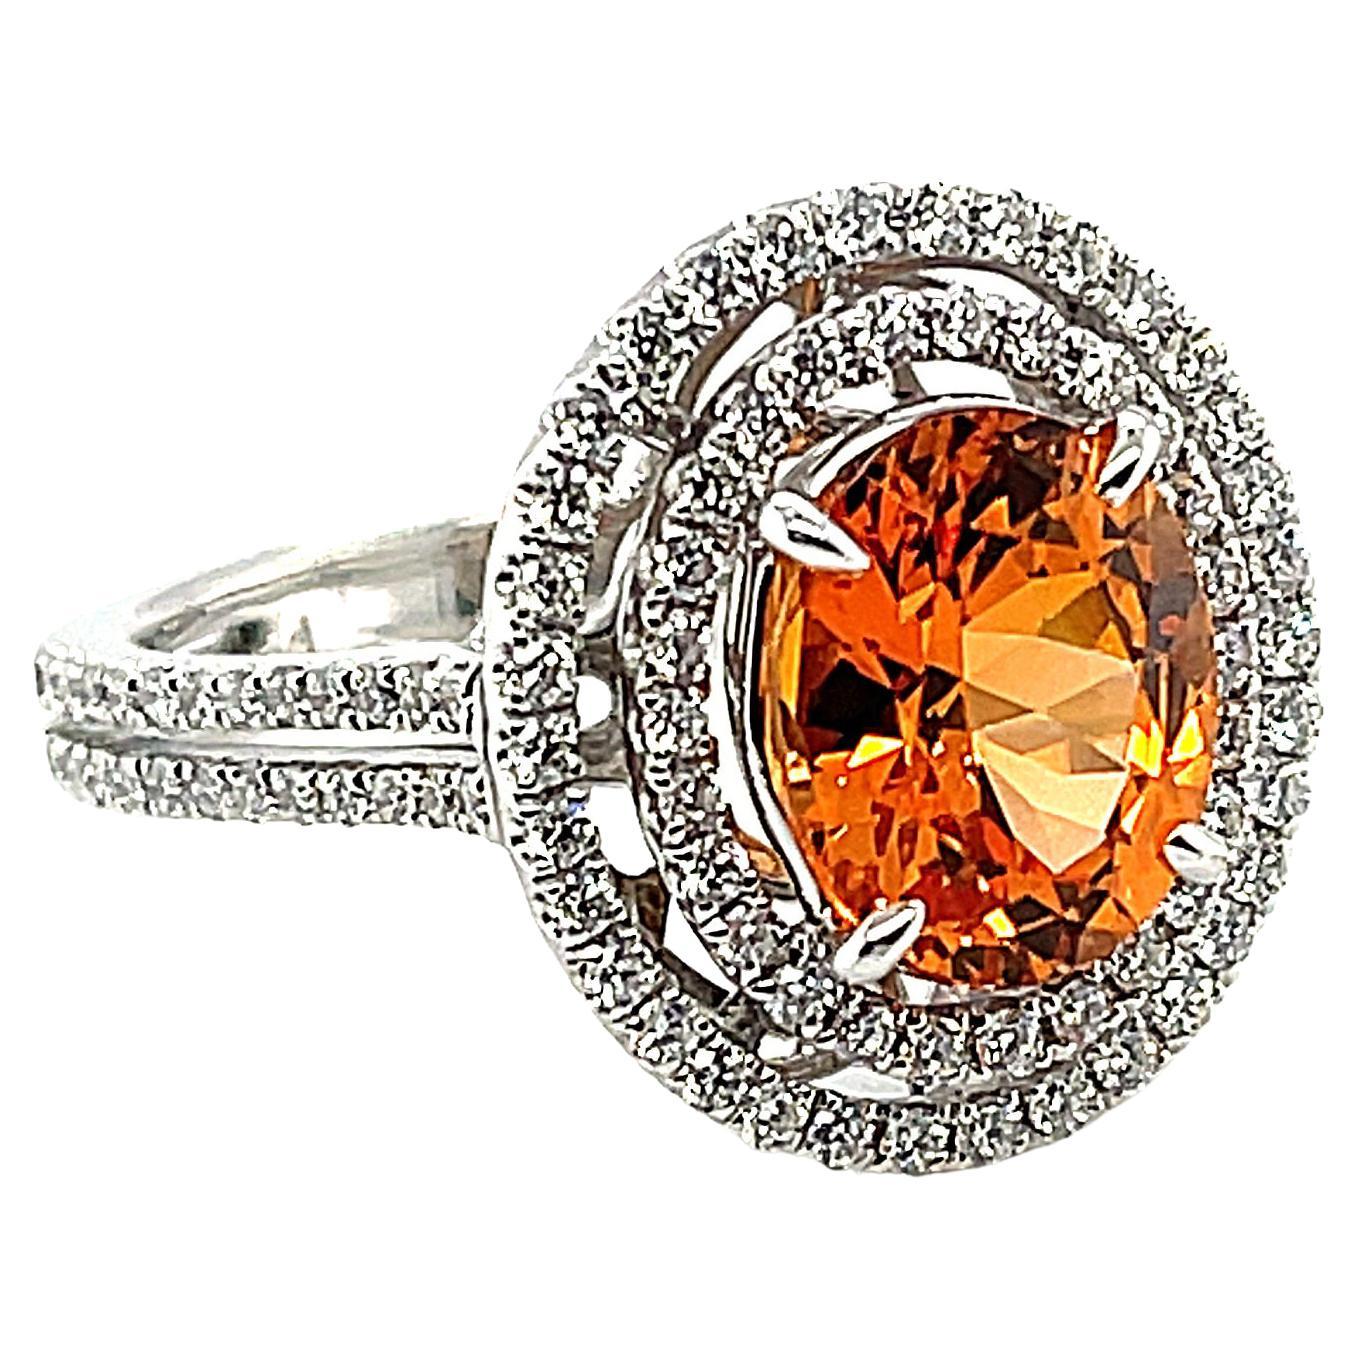 Treat yourself, or surprise your loved one with this breathtaking Mandarin garnet and diamond halo ring! 